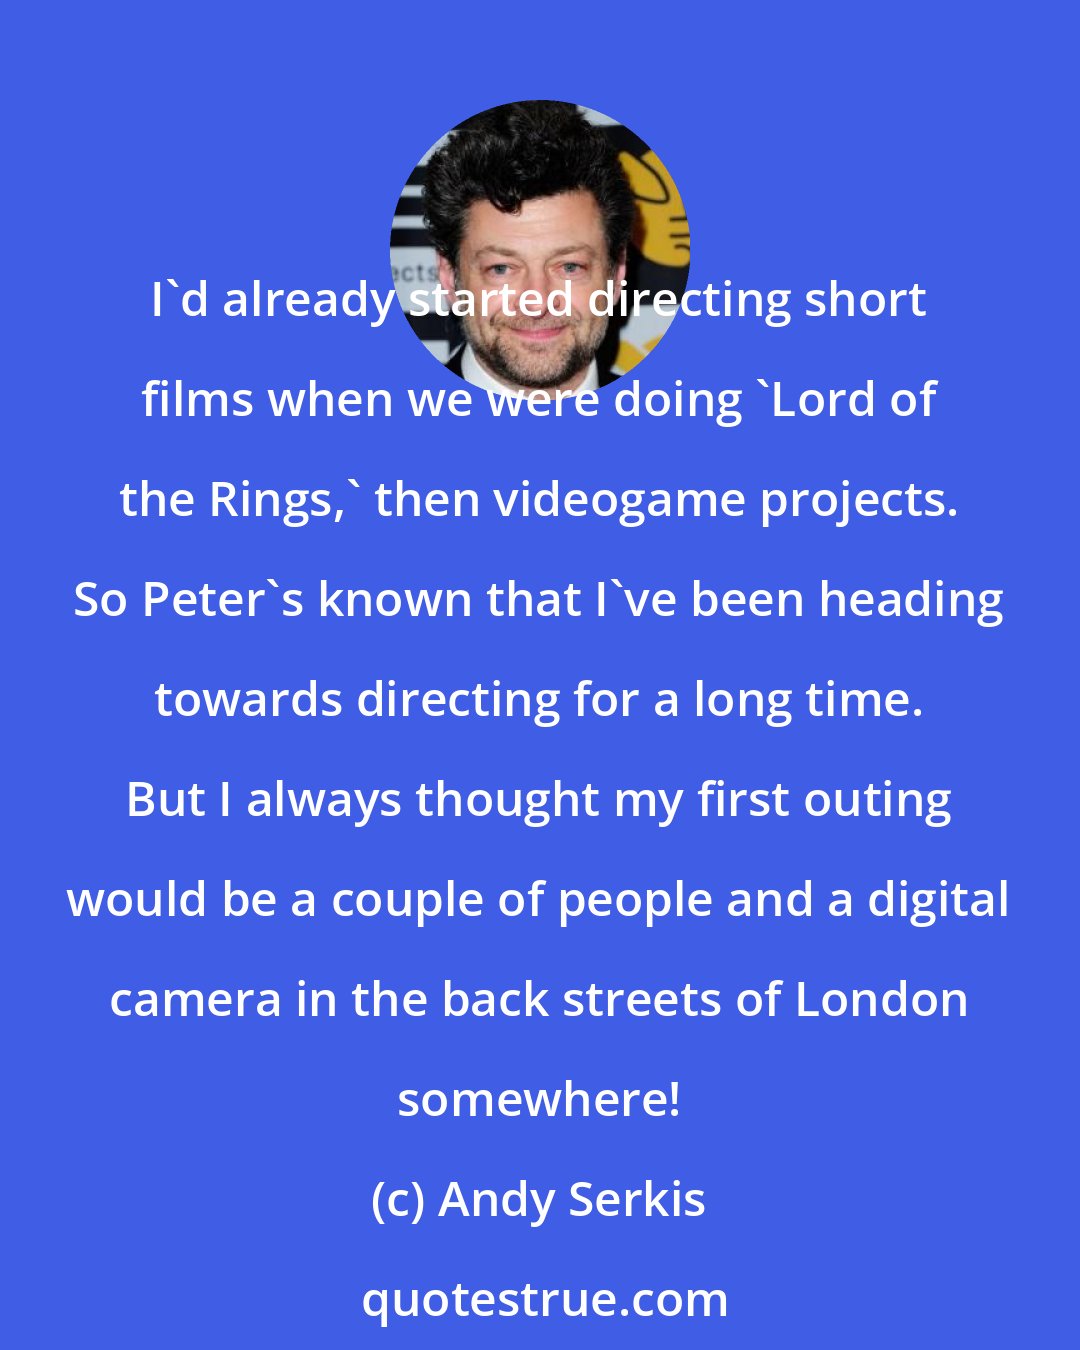 Andy Serkis: I'd already started directing short films when we were doing 'Lord of the Rings,' then videogame projects. So Peter's known that I've been heading towards directing for a long time. But I always thought my first outing would be a couple of people and a digital camera in the back streets of London somewhere!